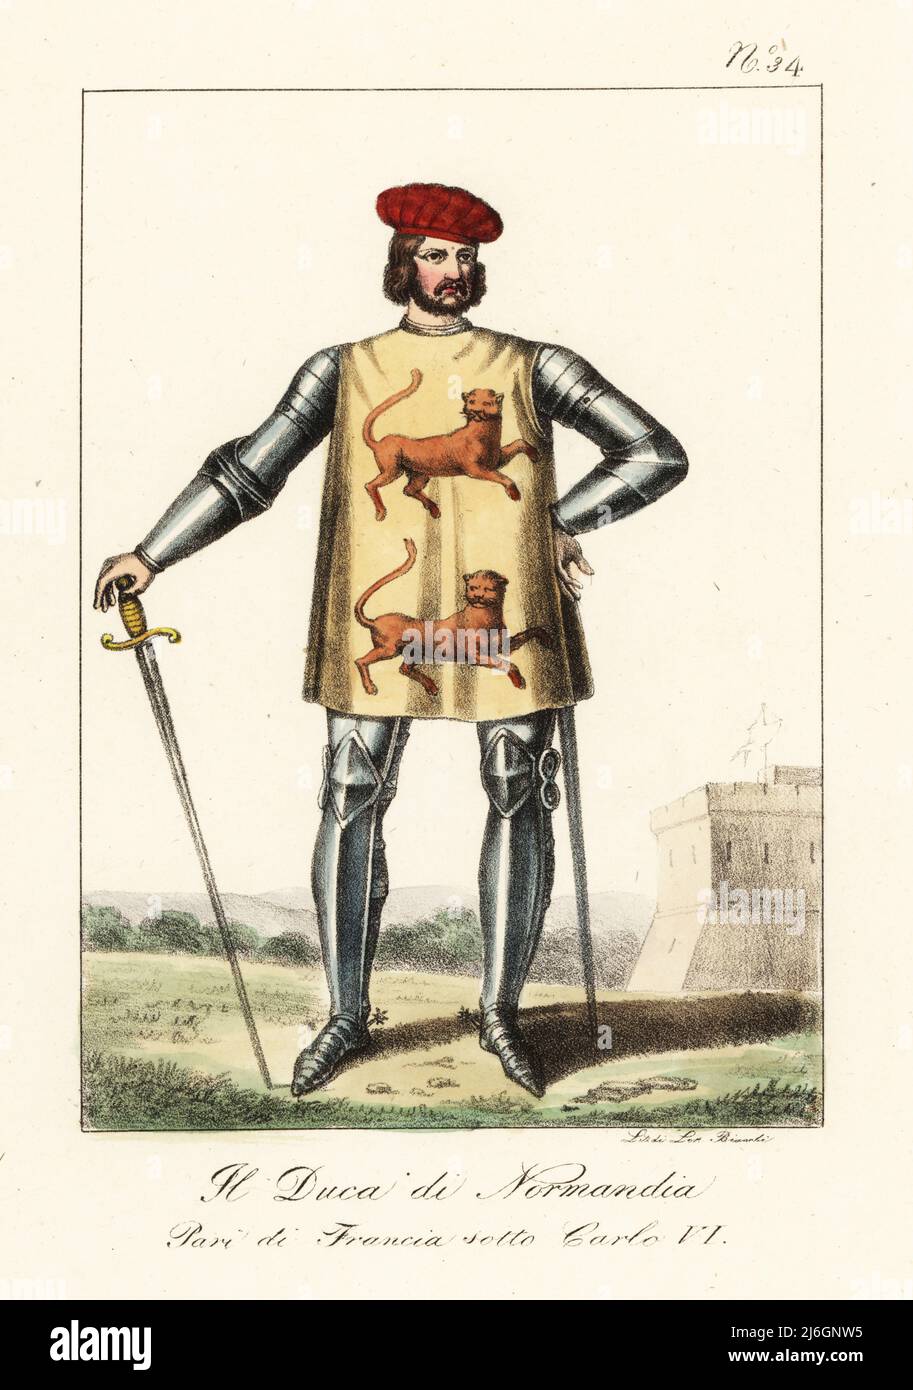 Costume of the Duke of Normandy, French peer under King Charles VI, 1380-1422. In red beret, suit of plate armour, armorial tunic with two gold leopards, armed with a sword. Le Duc de Normandie. Pair de France sous Charles VI. Handcoloured lithograph by Lorenzo Bianchi after Hippolyte Lecomte from Costumi civili e militari della monarchia francese dal 1200 al 1820, Naples, 1825. Italian edition of Lecomte’s Civilian and military costumes of the French monarchy from 1200 to 1820. Stock Photo